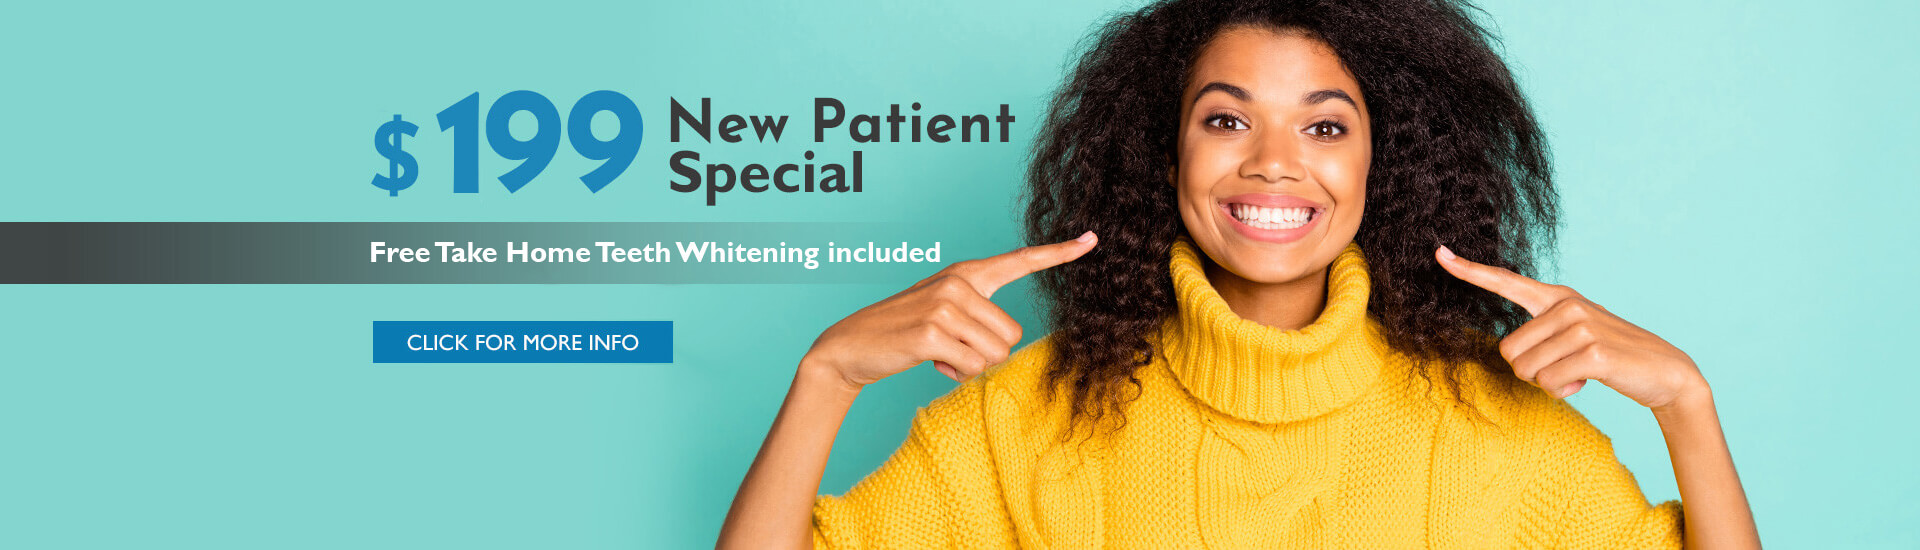 Home page Dentist Offer banner for new patients and free teeth whitening